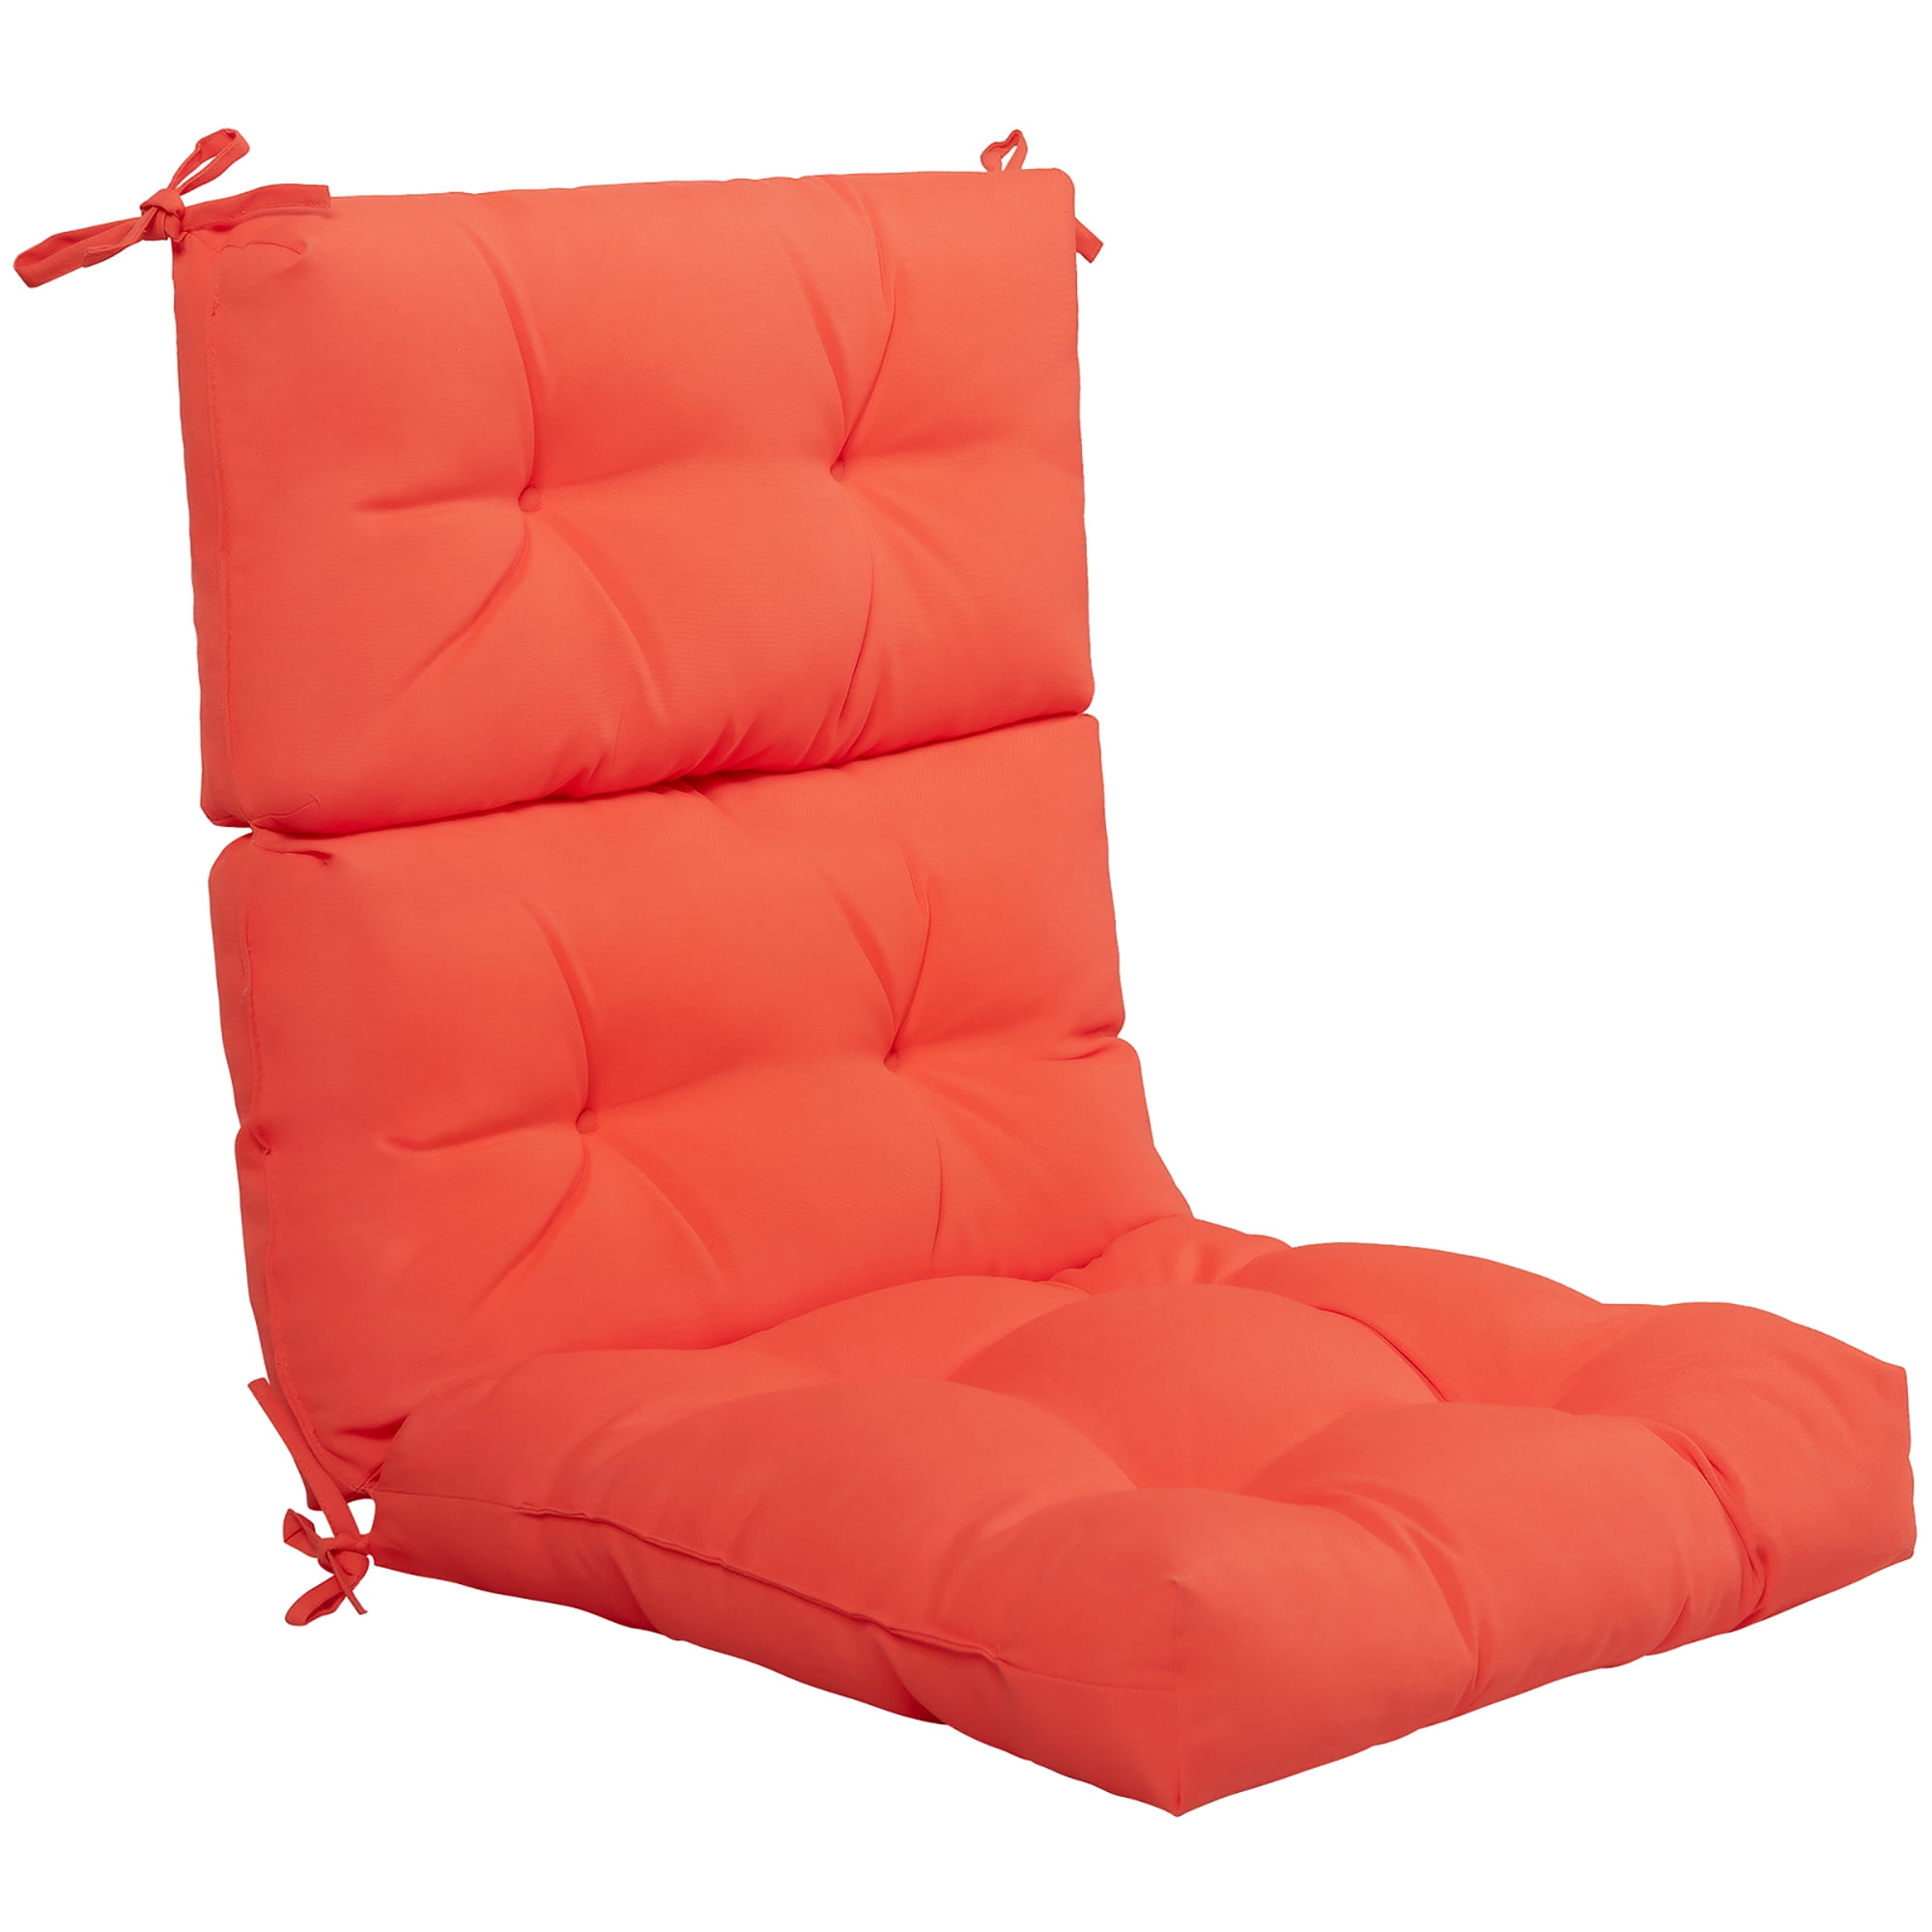 45" Seat/Back Chair Cushion Tufted Pillow Indoor Outdoor Swing Seat Set Of 2 